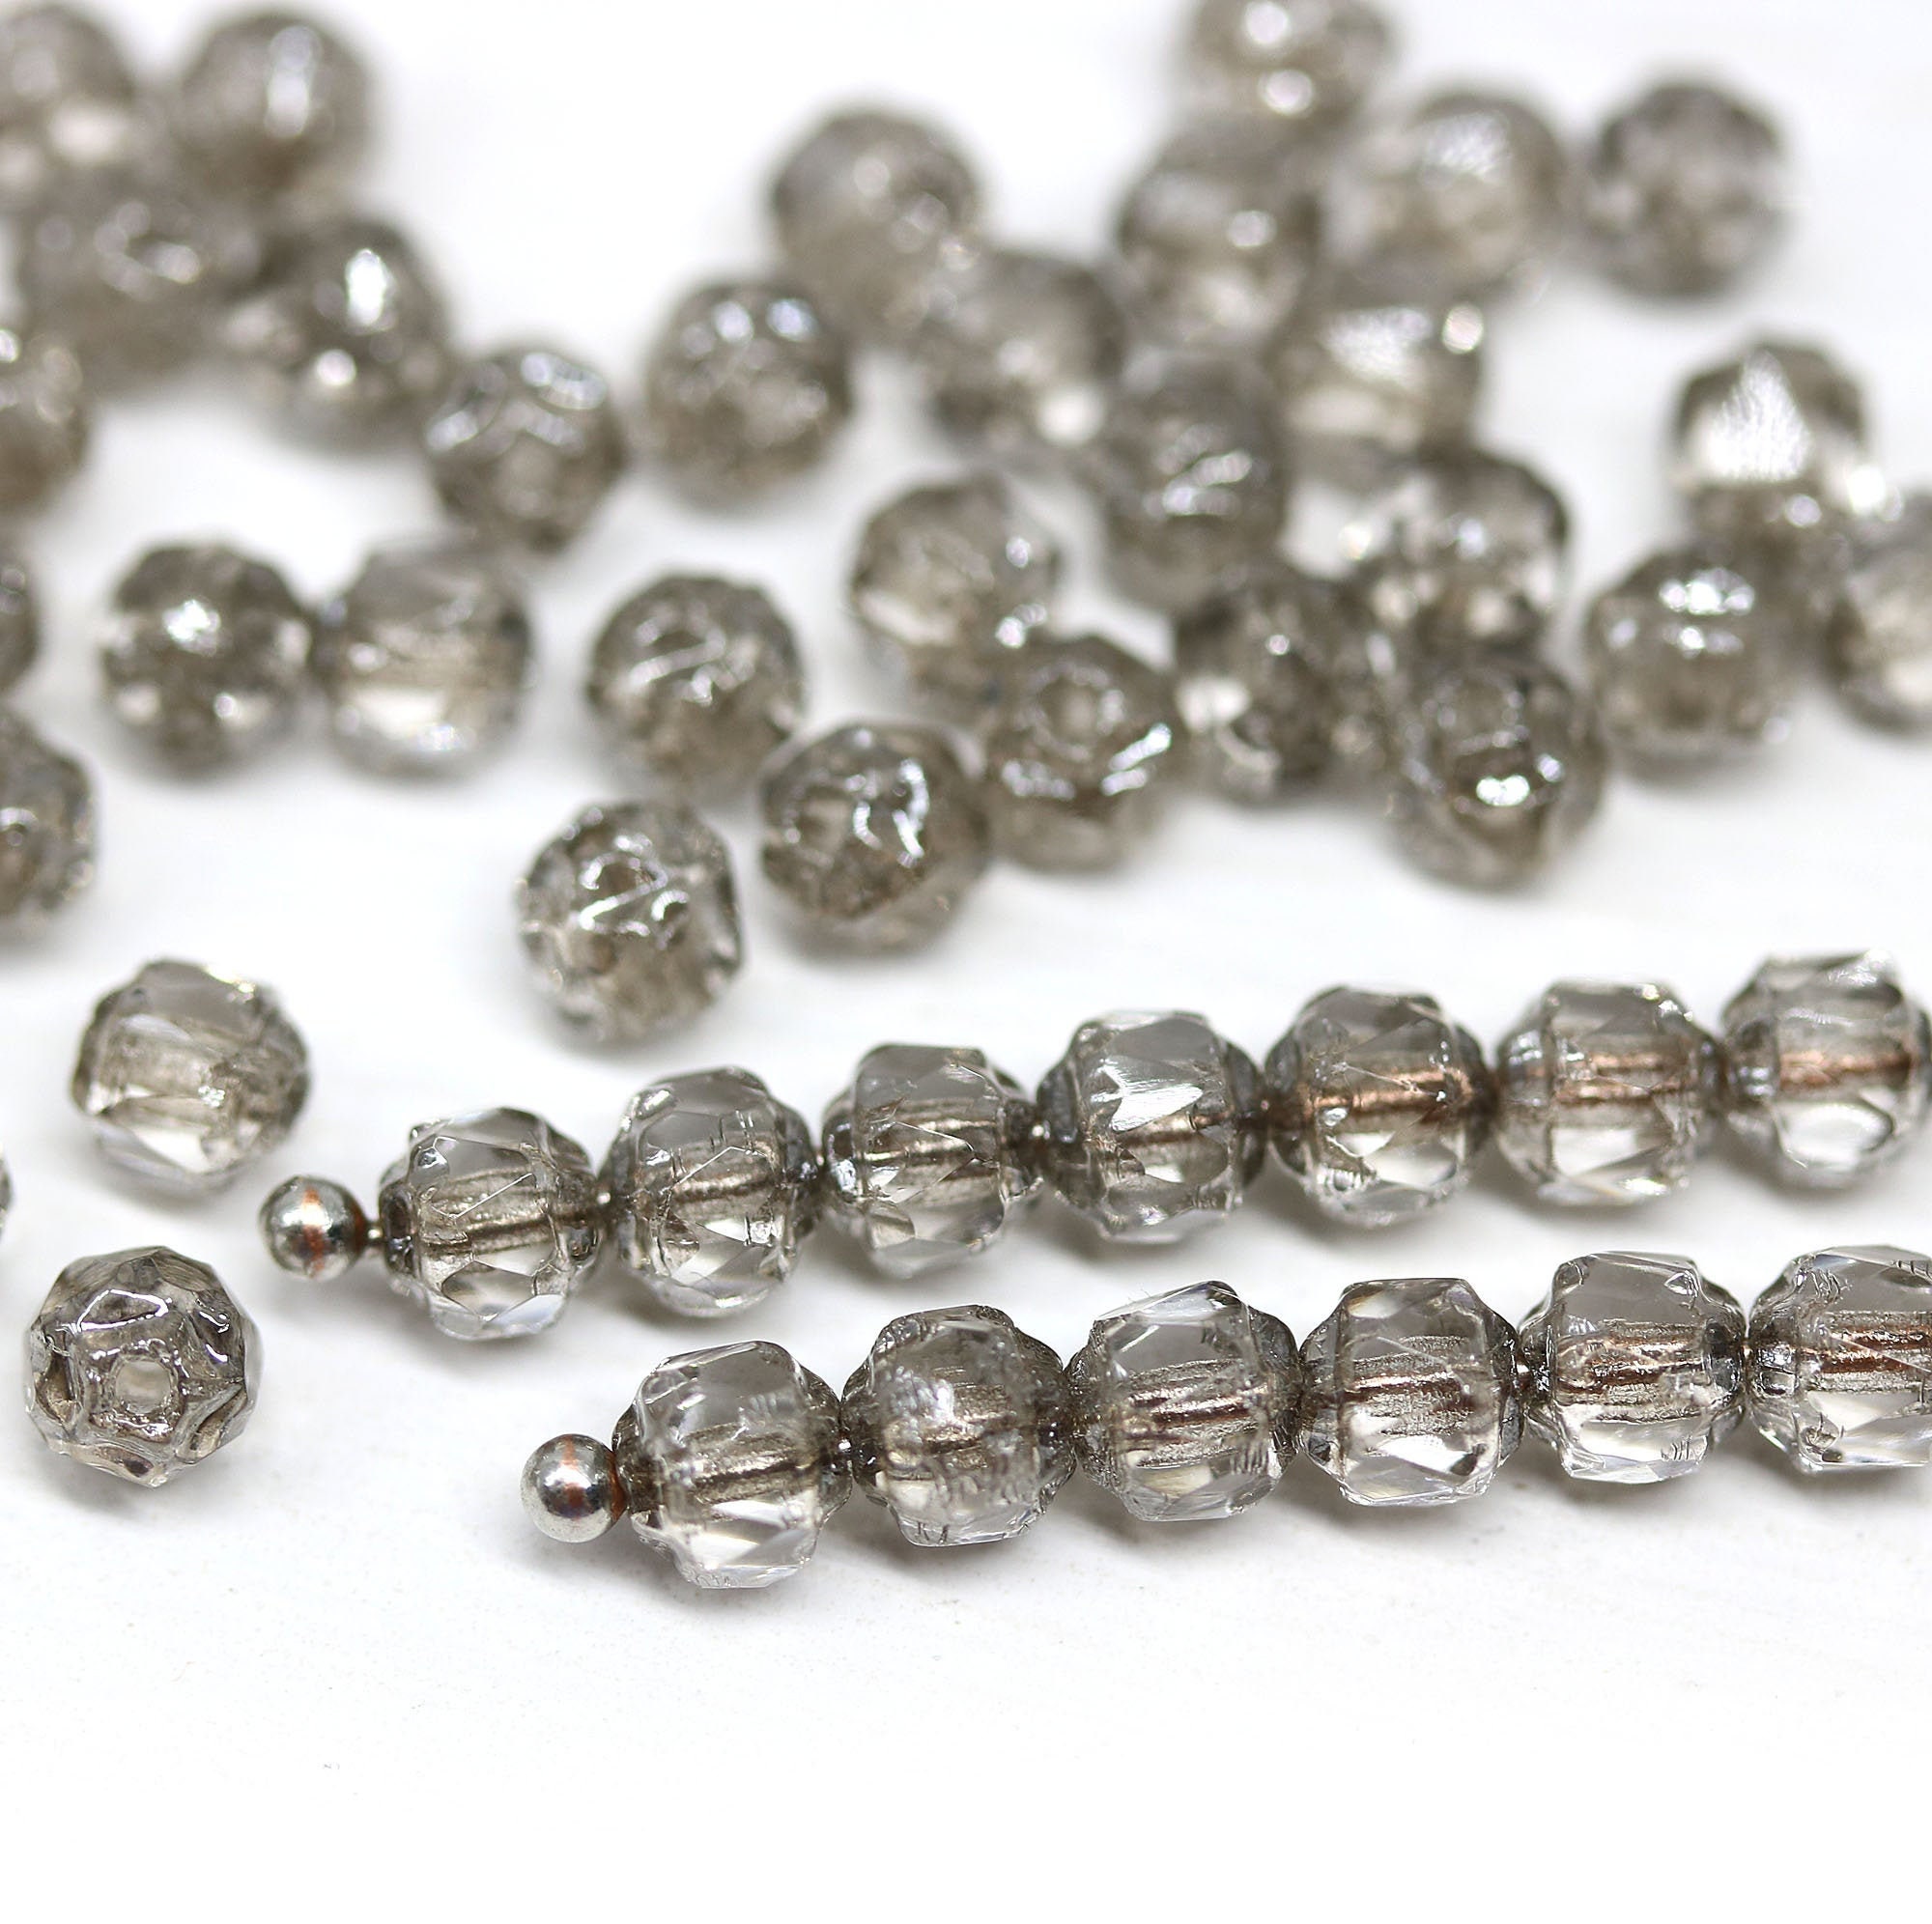 50pcs Crystal Metallic Silver Czech Glass Cathedral Faceted Fire Polished Beads